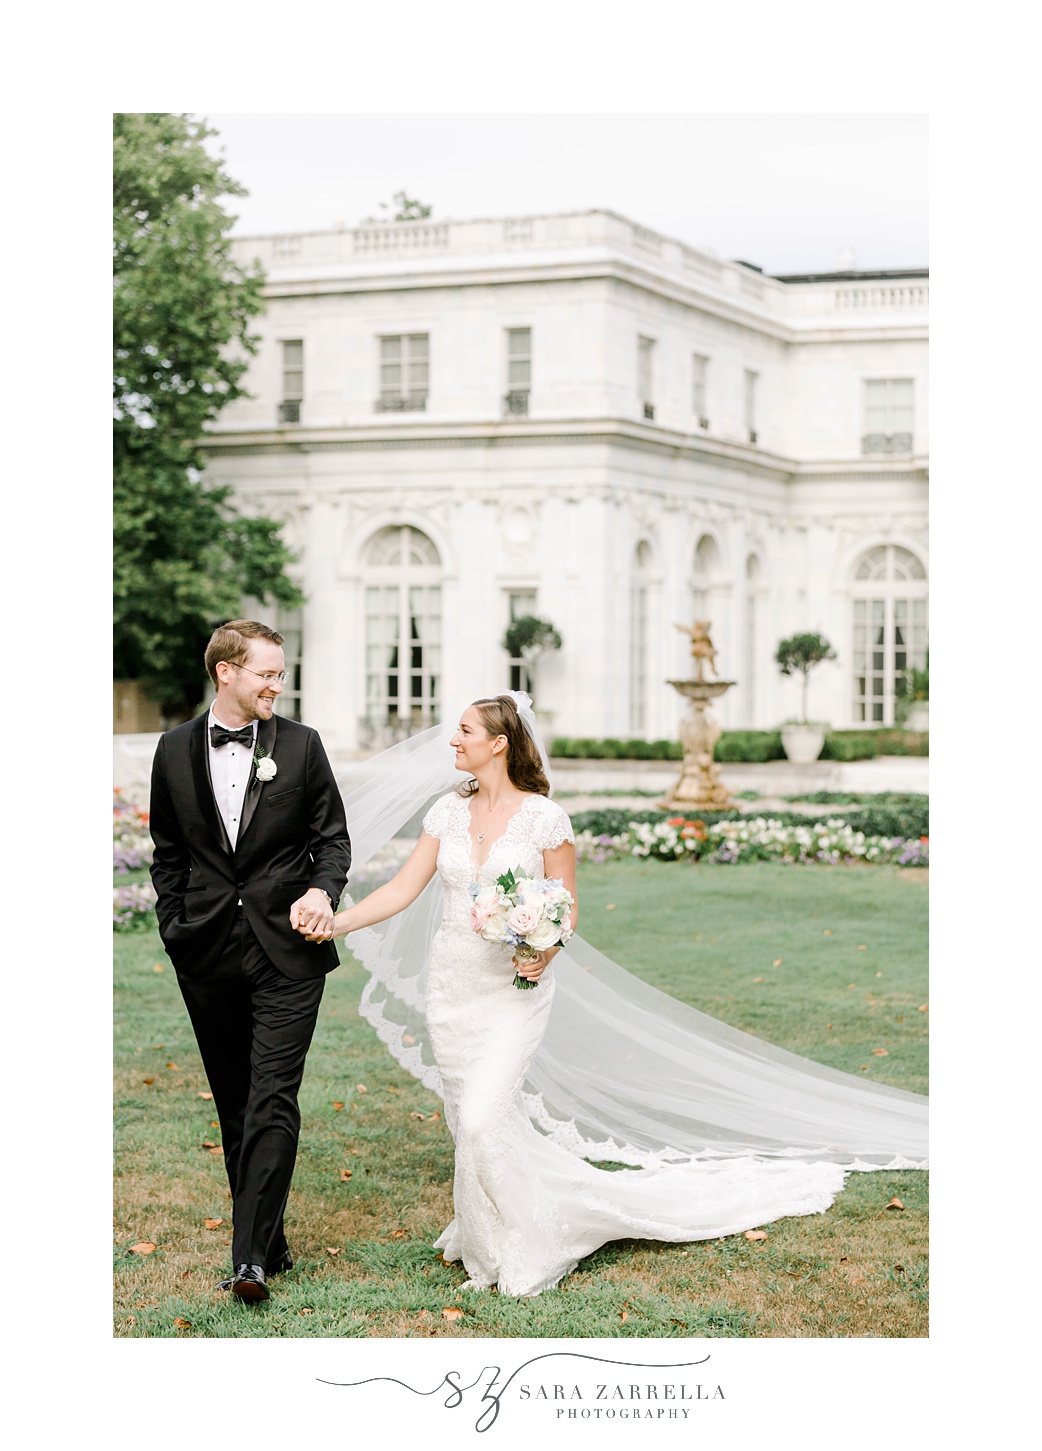 couple holds hands walking on lawn at Rosecliff Mansion with bride's veil trailing behind them